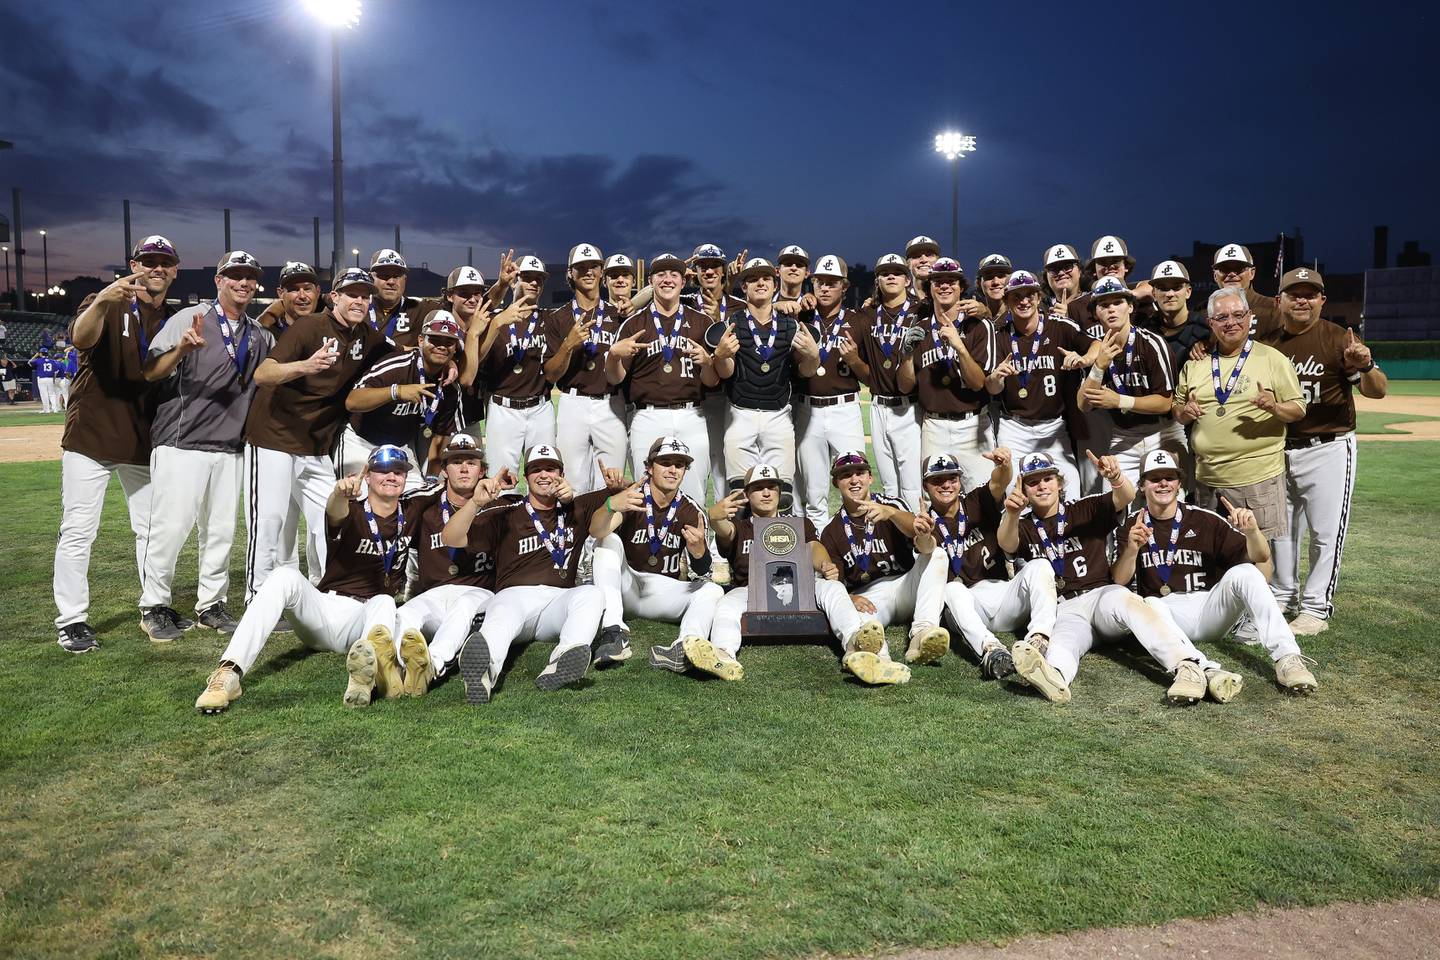 Joliet Catholic poses with championship trophy holding up two fingers, for their back-to-back championships, after a 4-2 win over Columbia in the IHSA Class 2A State Championship on Saturday, June 3, 2023 in Peoria.